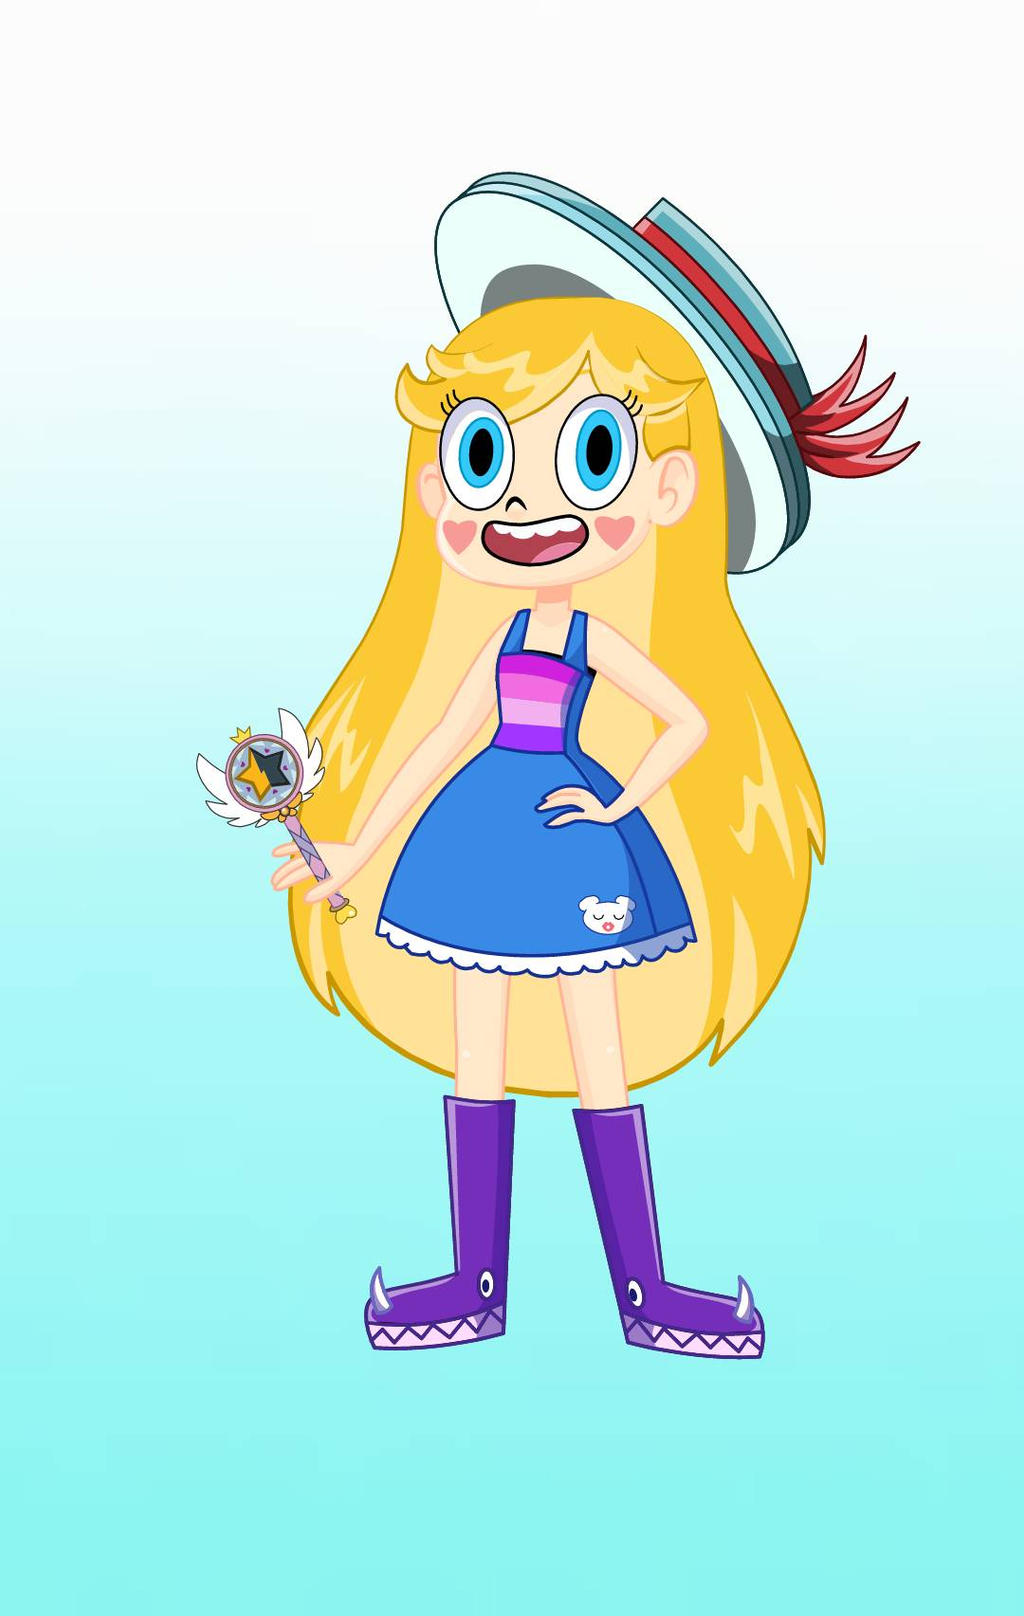 Star Butterfly Dress Up Do You Like My Outfit By.